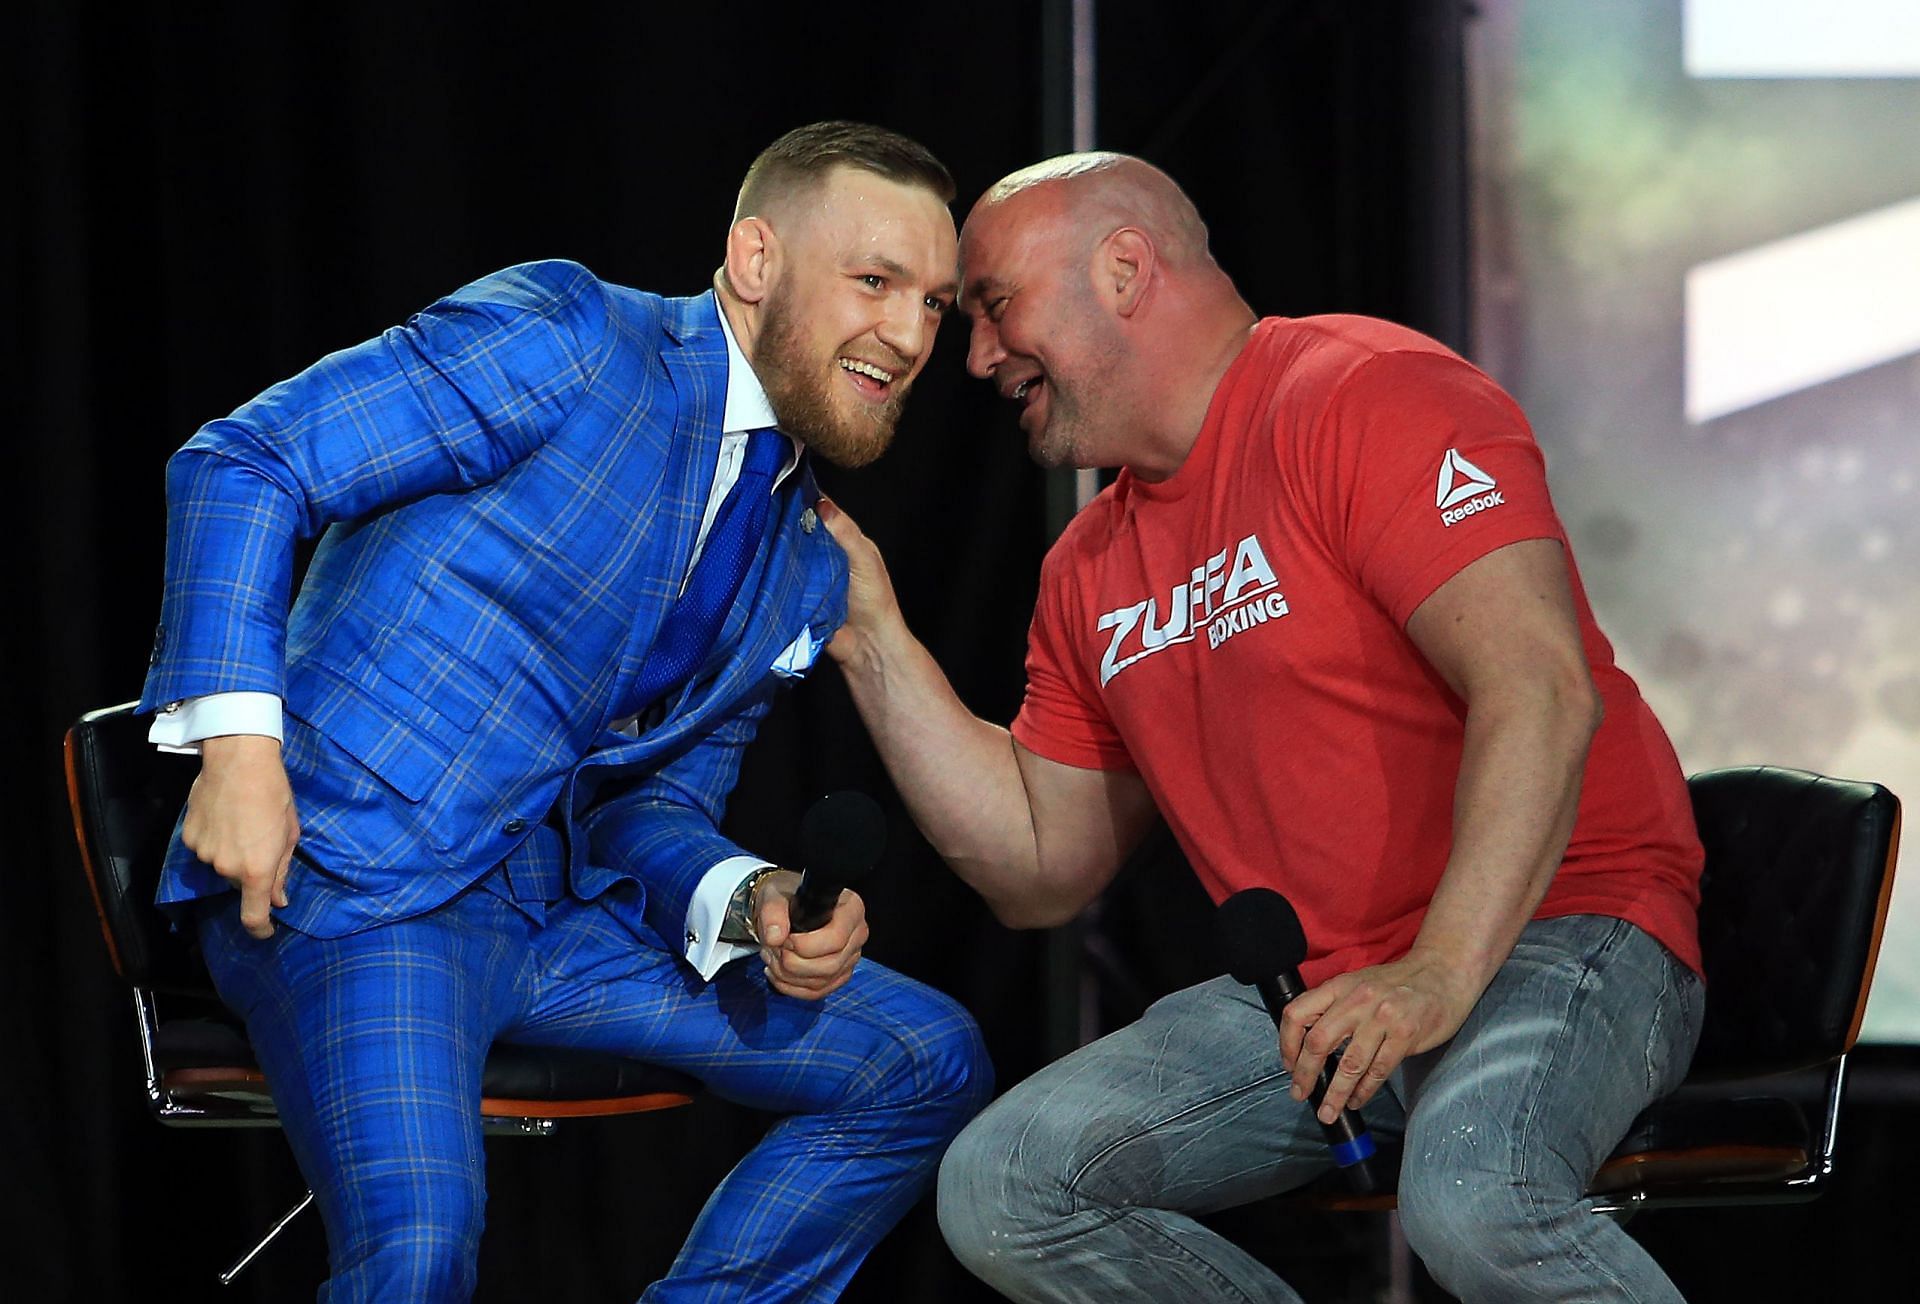 Dana White is often accused of favouring star fighters like Conor McGregor over others